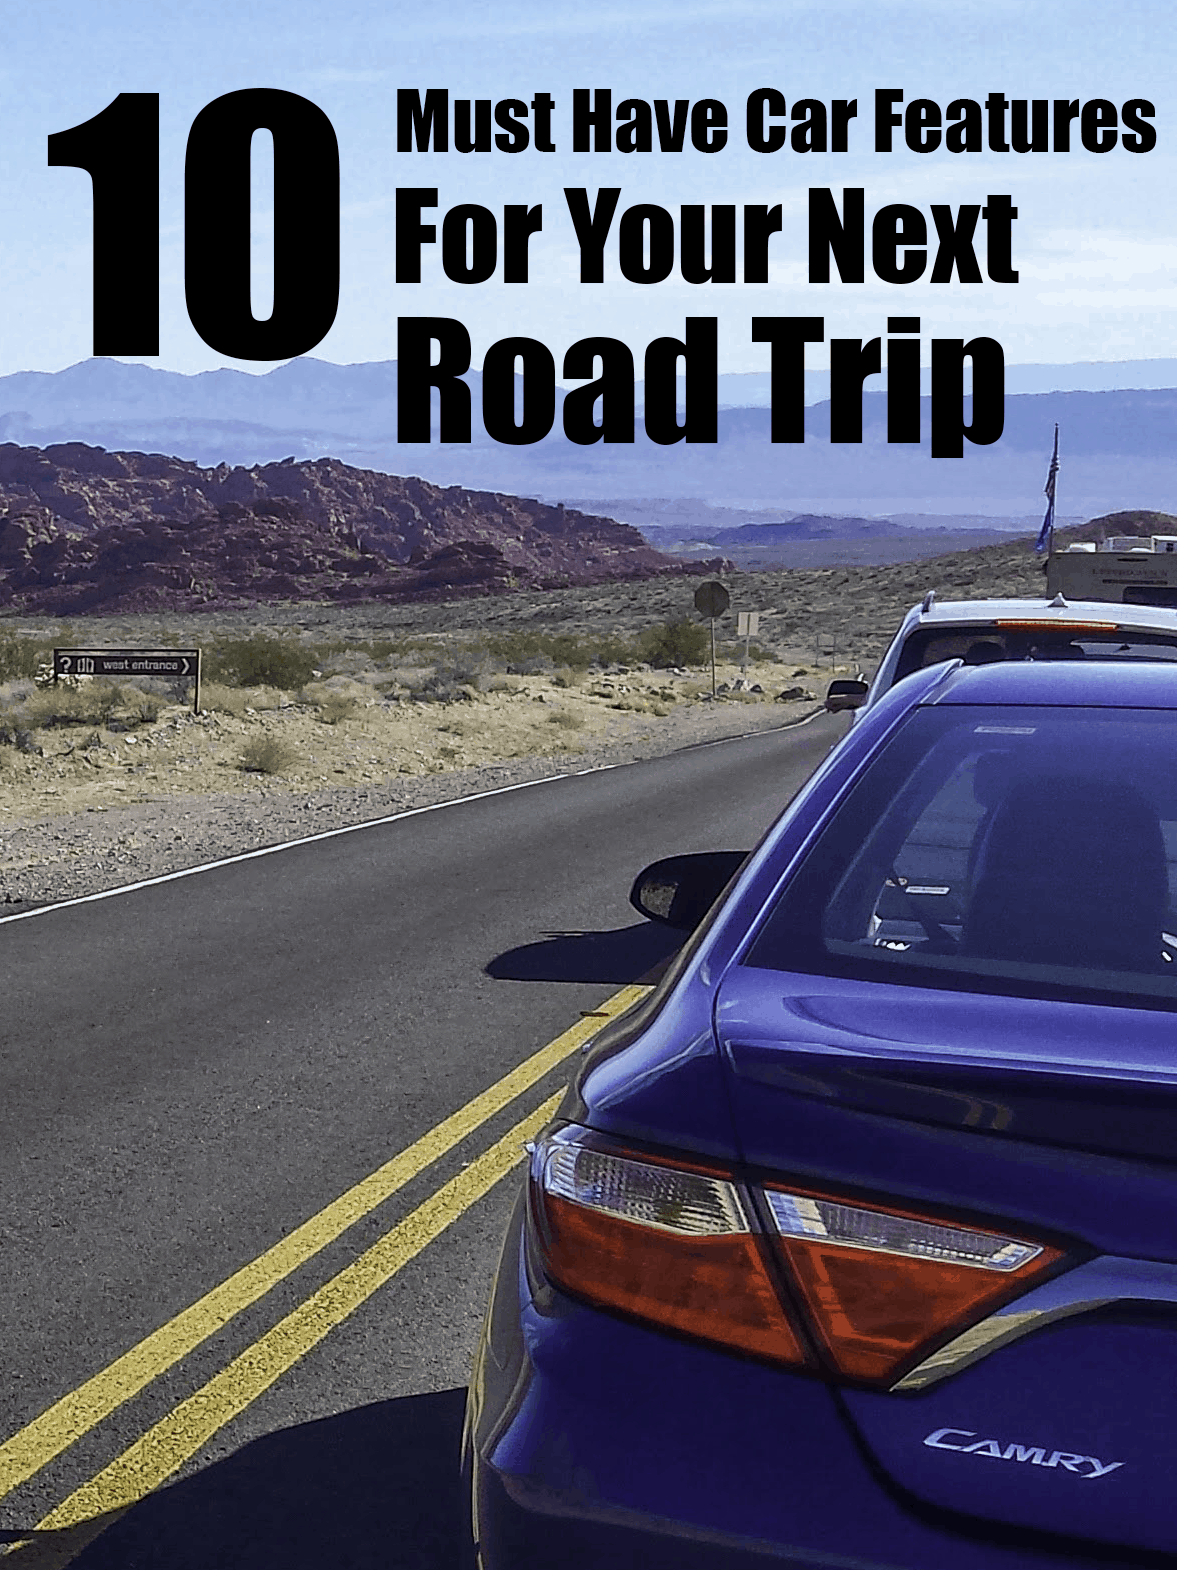 Before your next Road Trip, make sure your vehicle has the latest in car accessories. You wont want to miss this options. #Sponsored #Ad #CarsCom Road Trip Accessories | Car Accessories | Latest Car Features | Road Trip Success | Best Road Trip